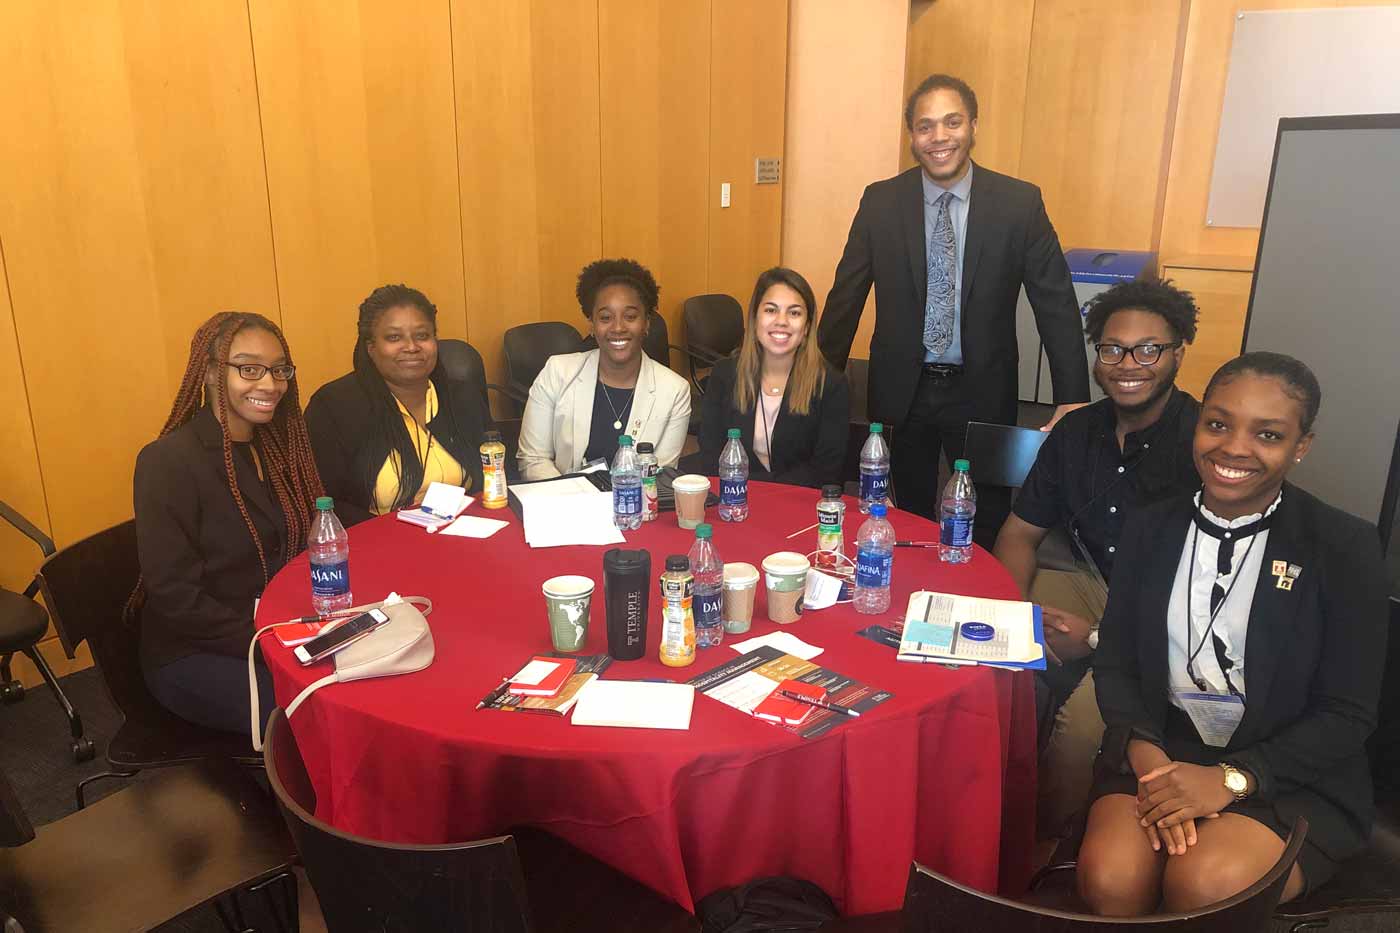 sthm-hosts-national-society-of-minority-students-in-hospitality-conference-school-of-sport